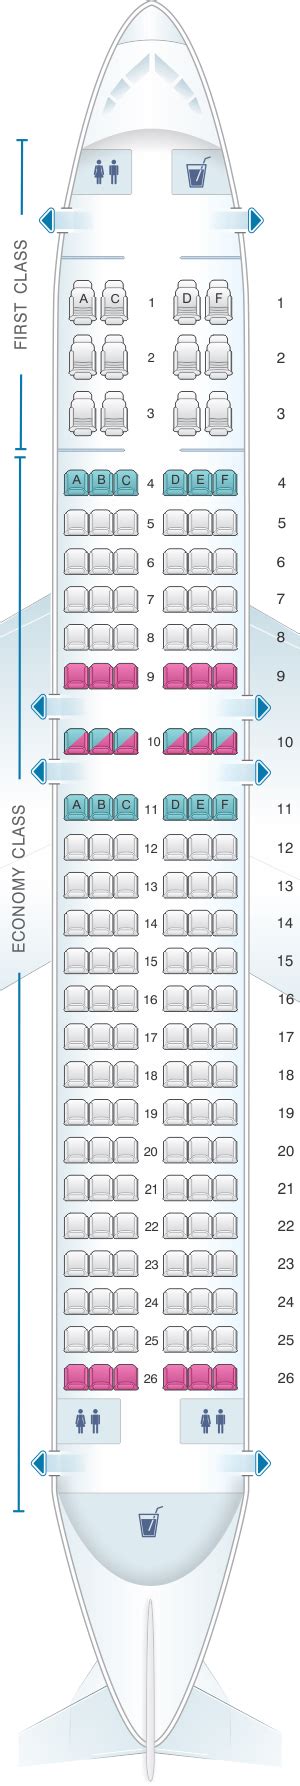 Https Seatmaestro Com Airplanes Seat Maps American Airlines